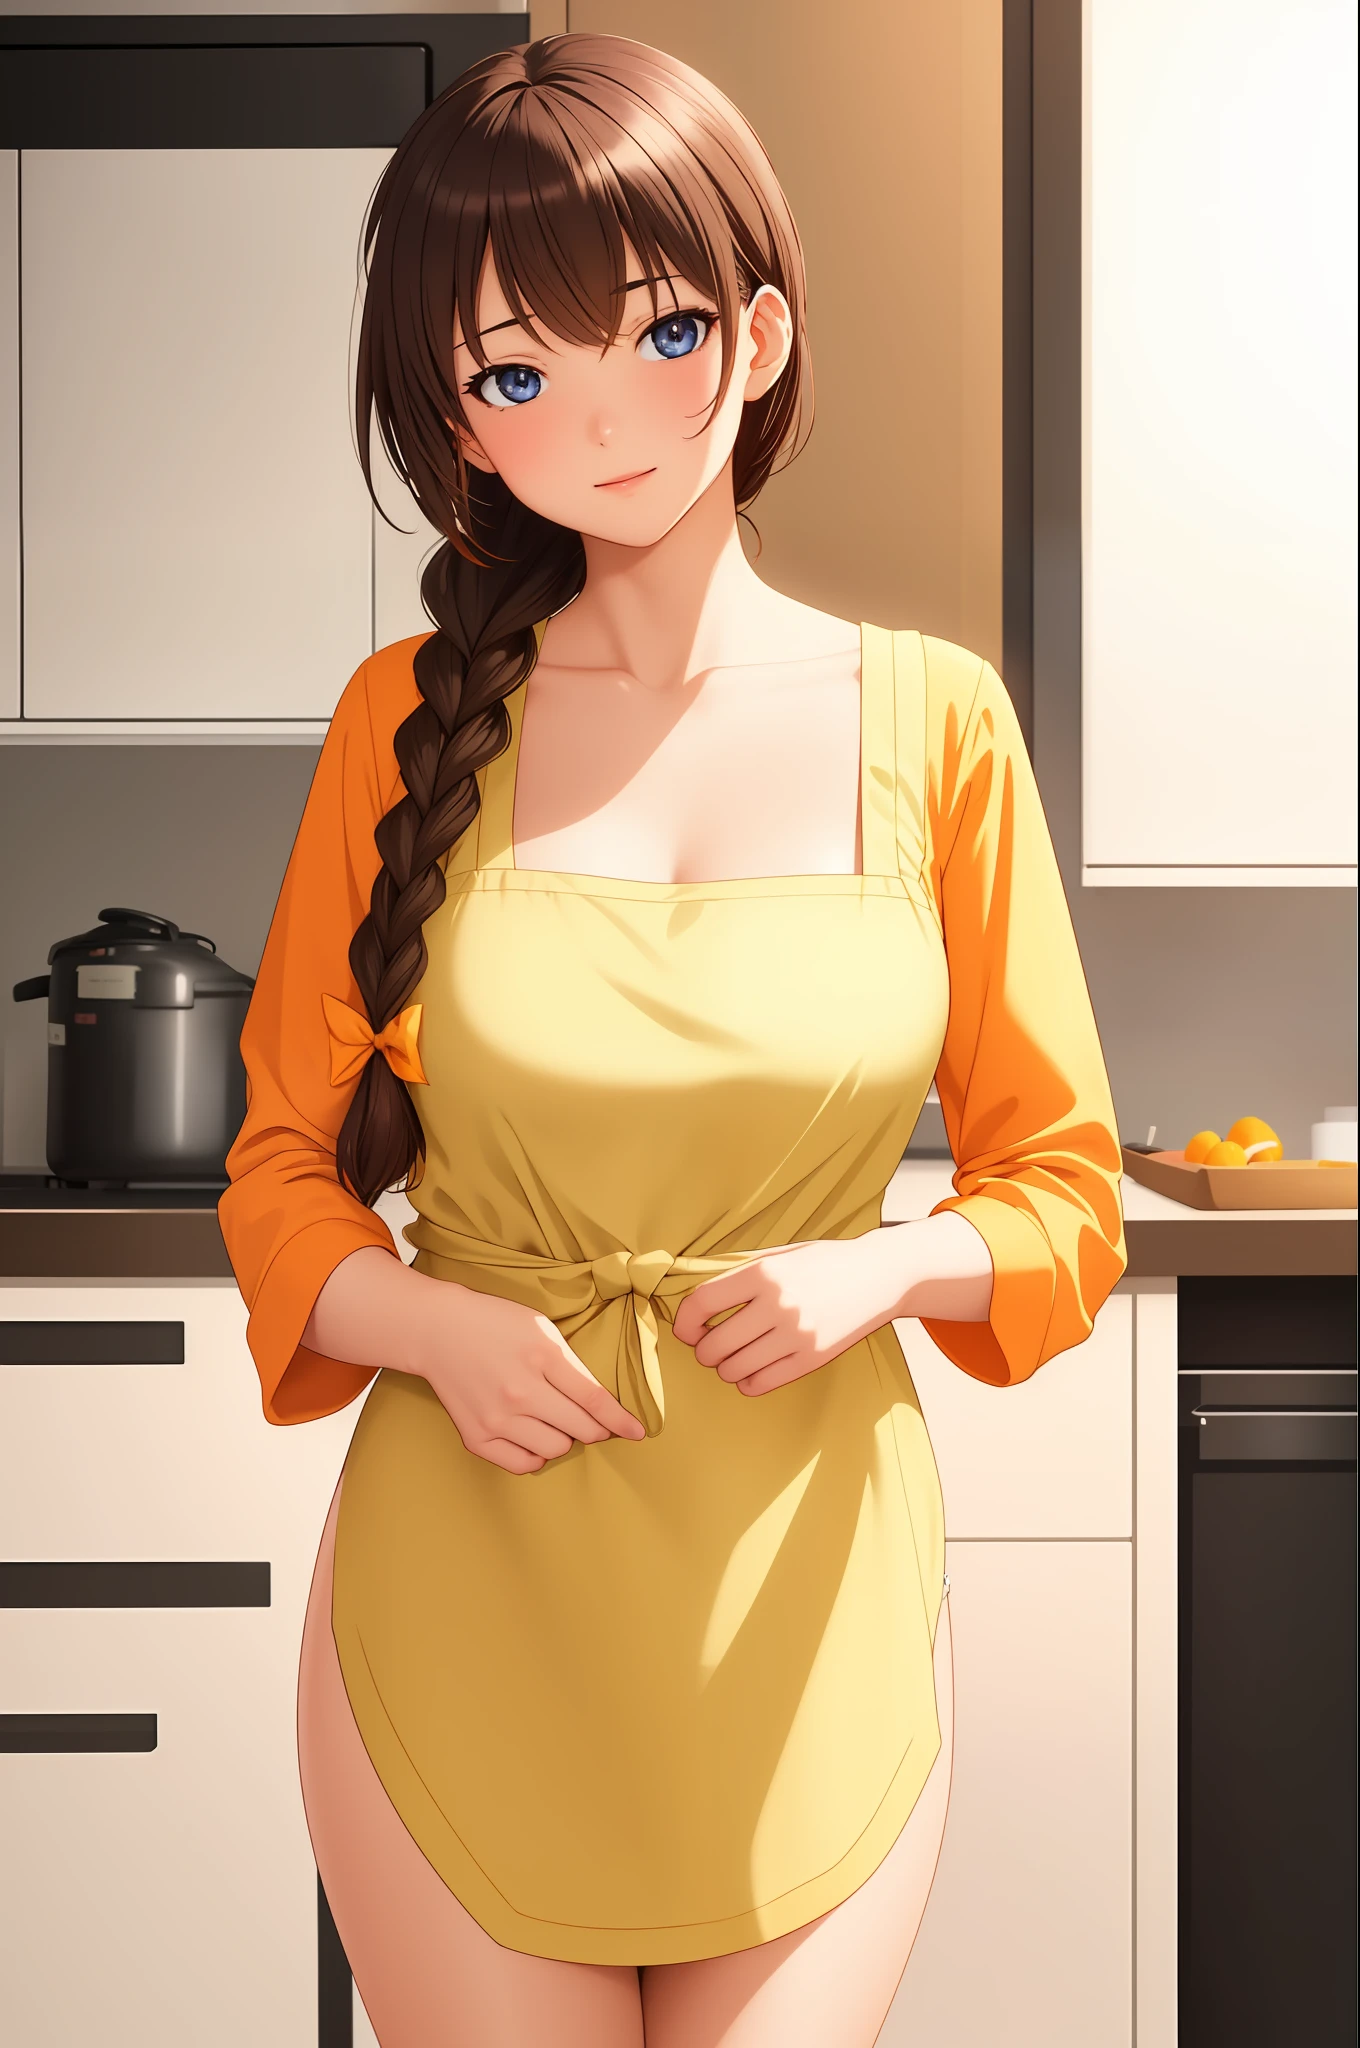 indoors, in a kitchen,
Standing on the floor,
apron, collarbone, (Yellow_shirt),
bangs, Brown Hair, Blue eyes,single braid, Orange hair ribbon, 
1 girl, 20yo,Young female,Beautiful Finger,Beautiful long legs,Beautiful body,Beautiful Nose,Beautiful character design, perfect eyes, perfect face,expressive eyes,
looking at viewer, in the center of the image,(Upper_body),(Focus on her face),
official art,extremely detailed CG unity 8k wallpaper, perfect lighting,Colorful, Bright_Front_face_Lighting,shiny skin,
(masterpiece:1.0),(best_quality:1.0), ultra high res,4K,ultra-detailed,
photography, 8K, HDR, highres, absurdres:1.2, Kodak portra 400, film grain, blurry background, bokeh:1.2, lens flare, (vibrant_color:1.2)
(Beautiful,Breasts), (beautiful_face:1.5),(narrow_waist),